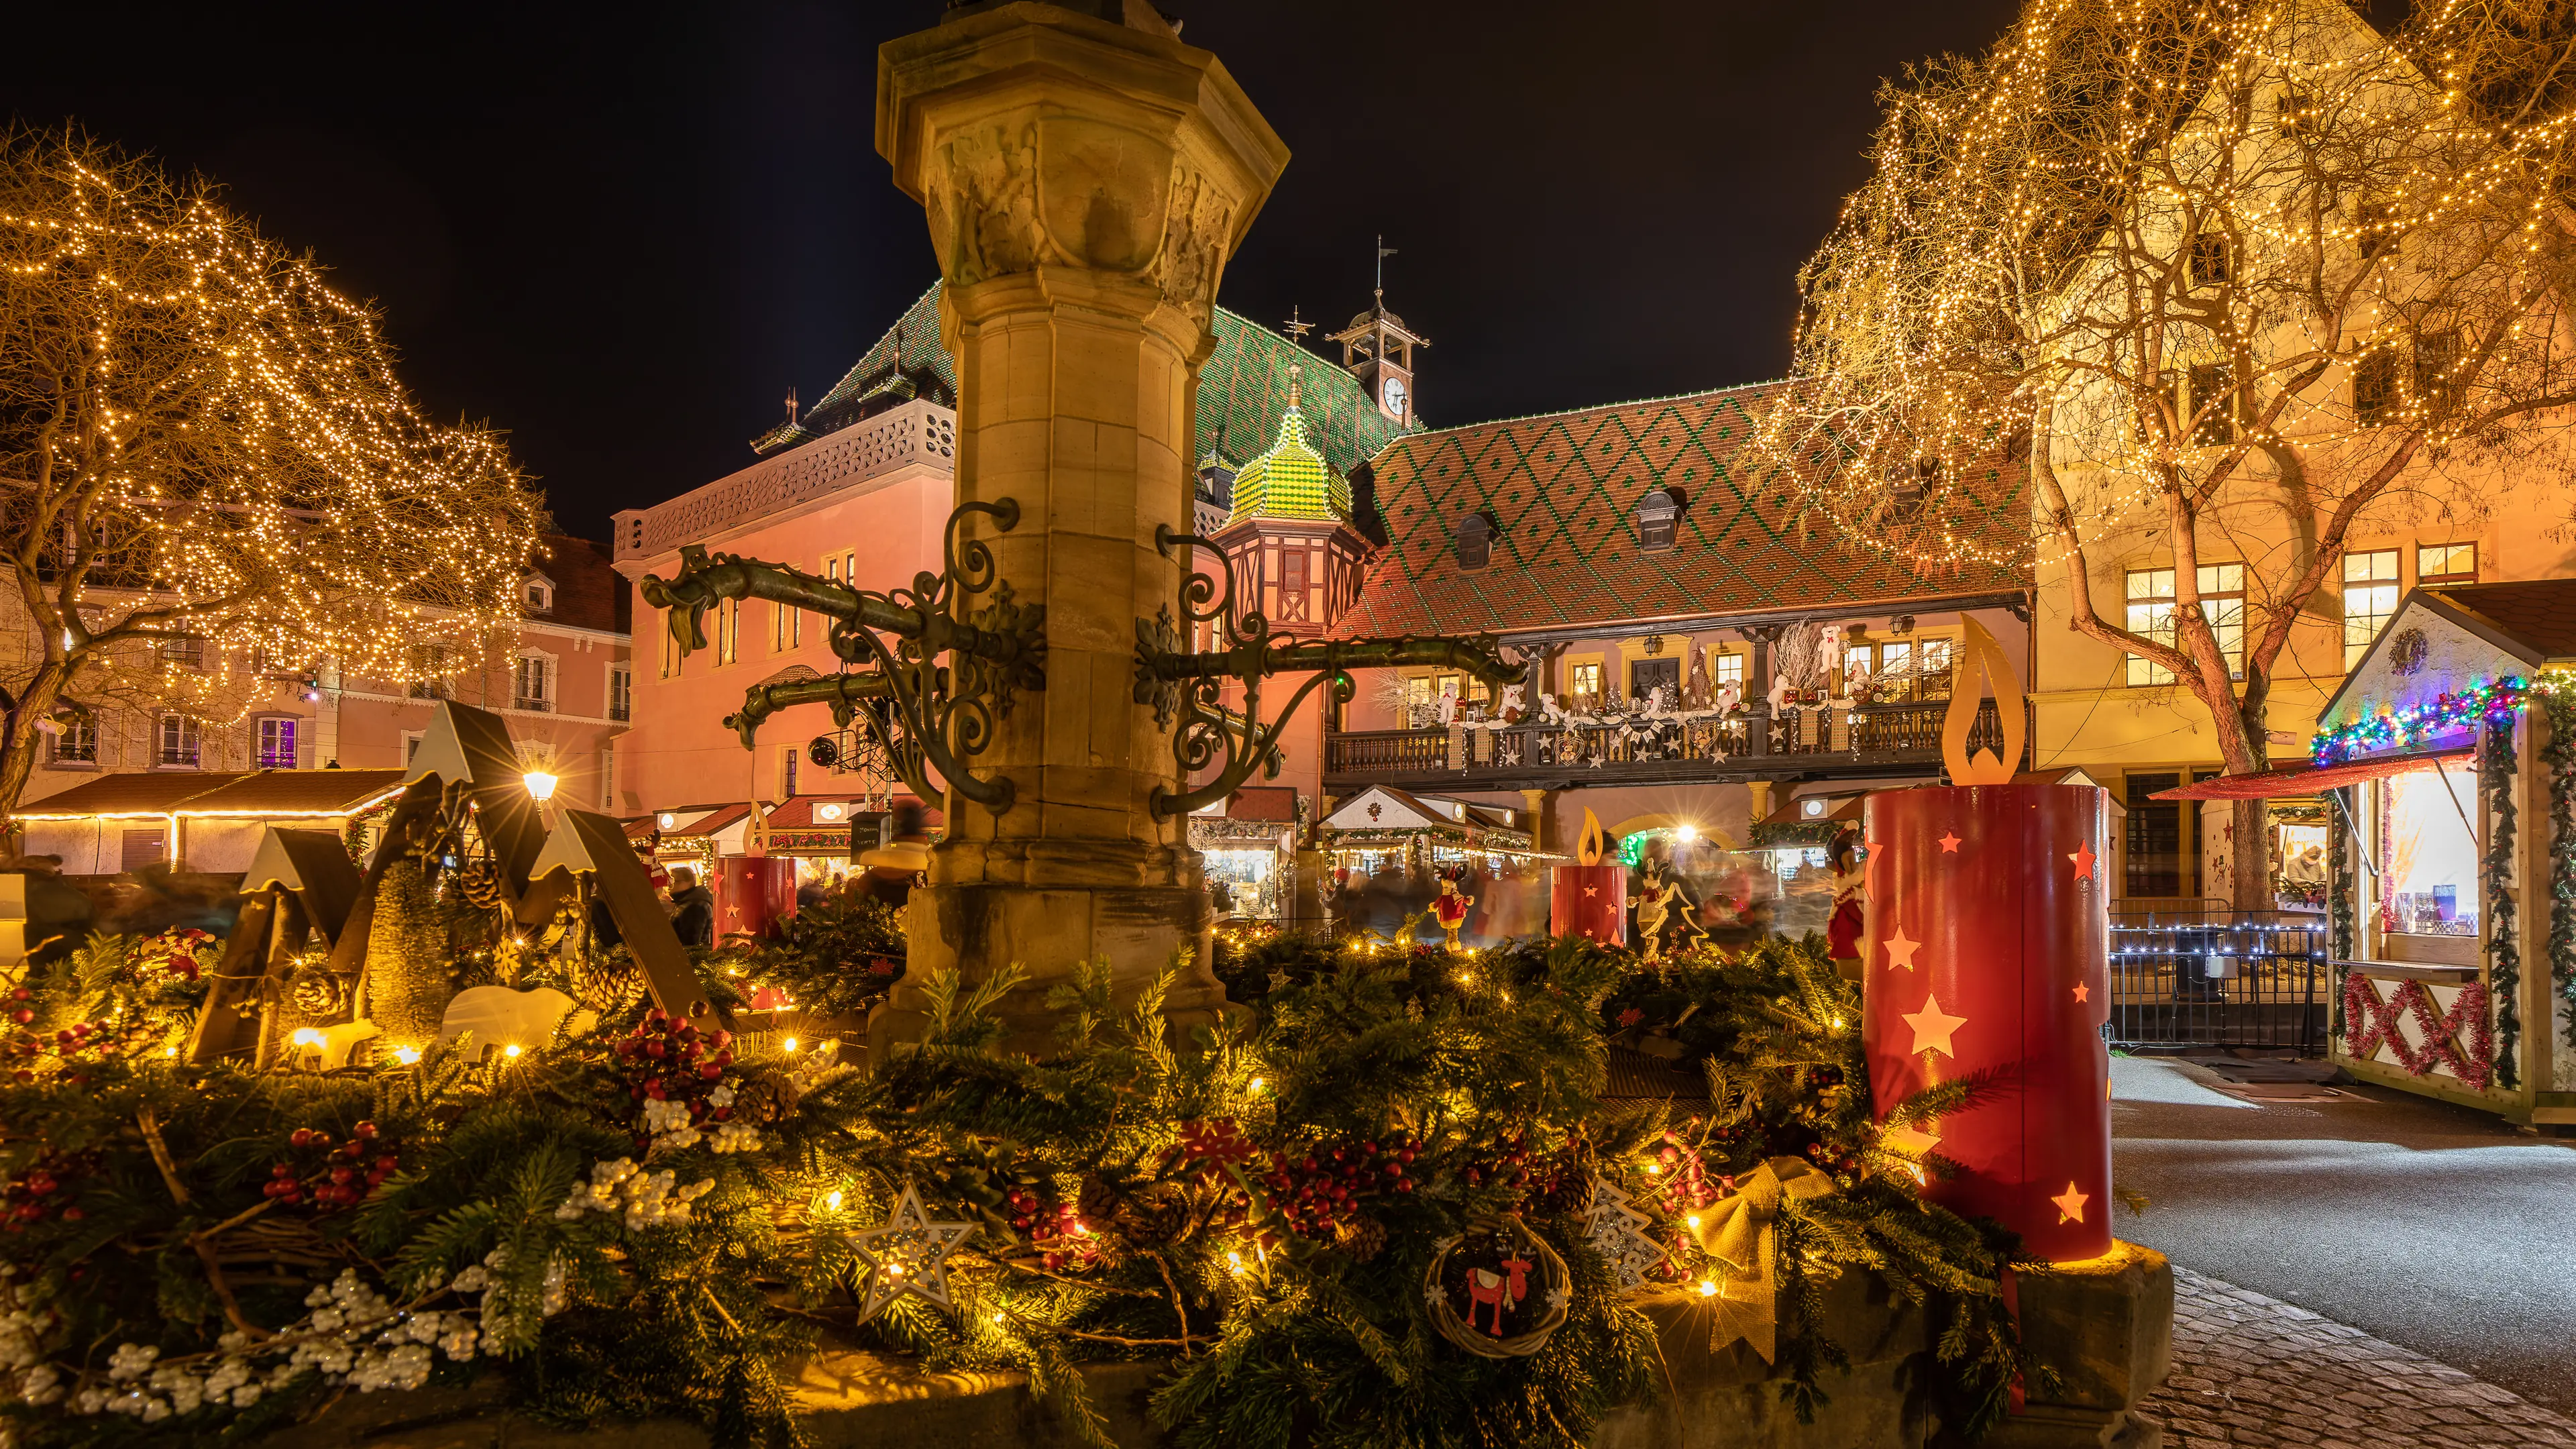 3-Day Family Christmas Holiday Itinerary in Colmar, France